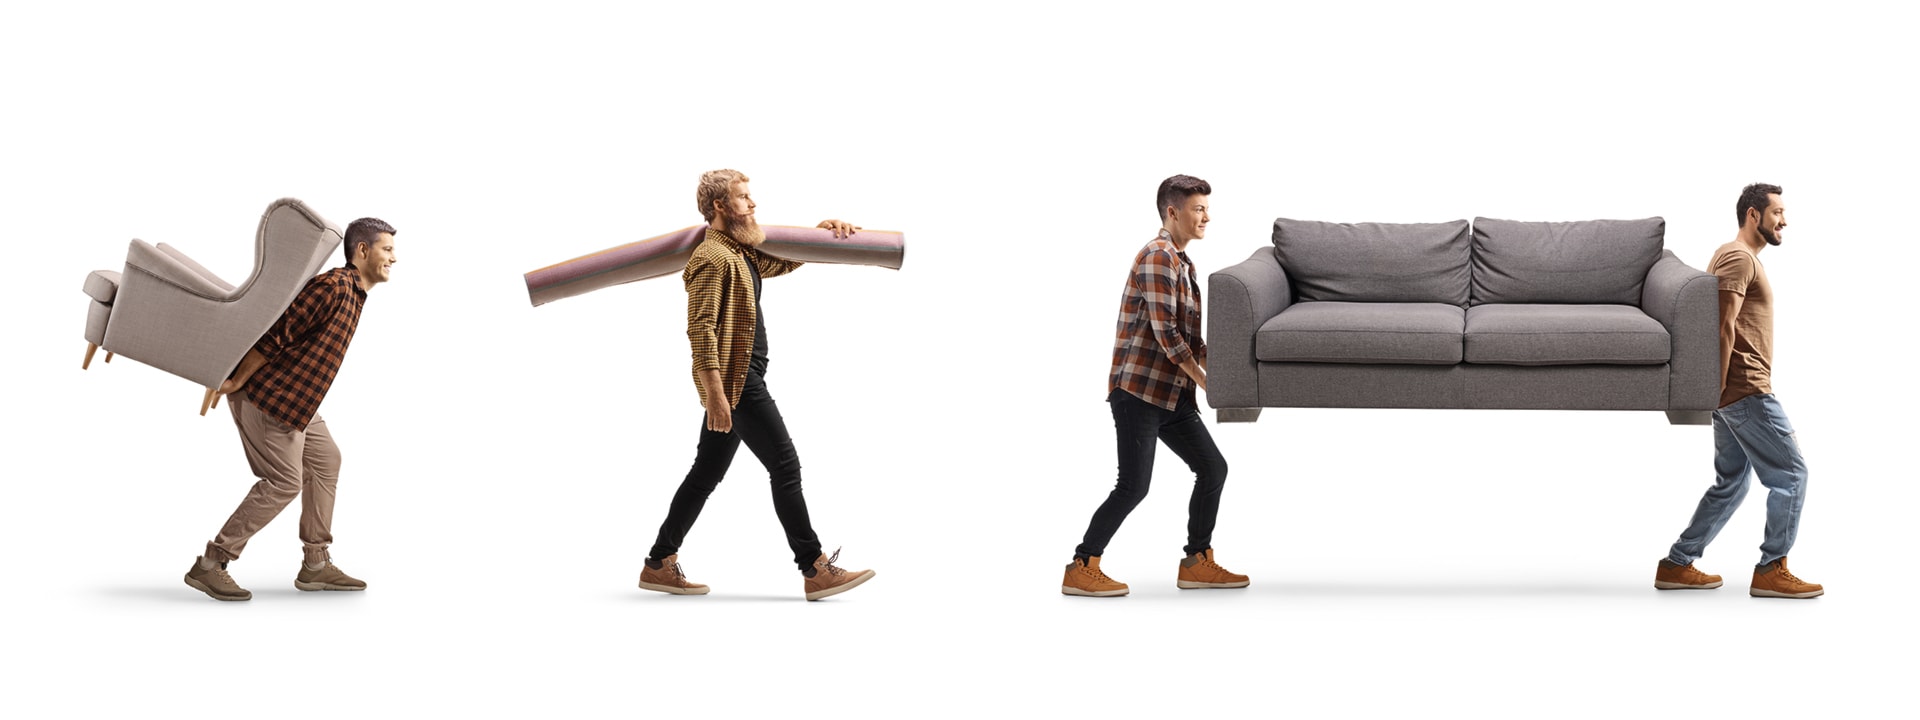 People Carrying Furniture